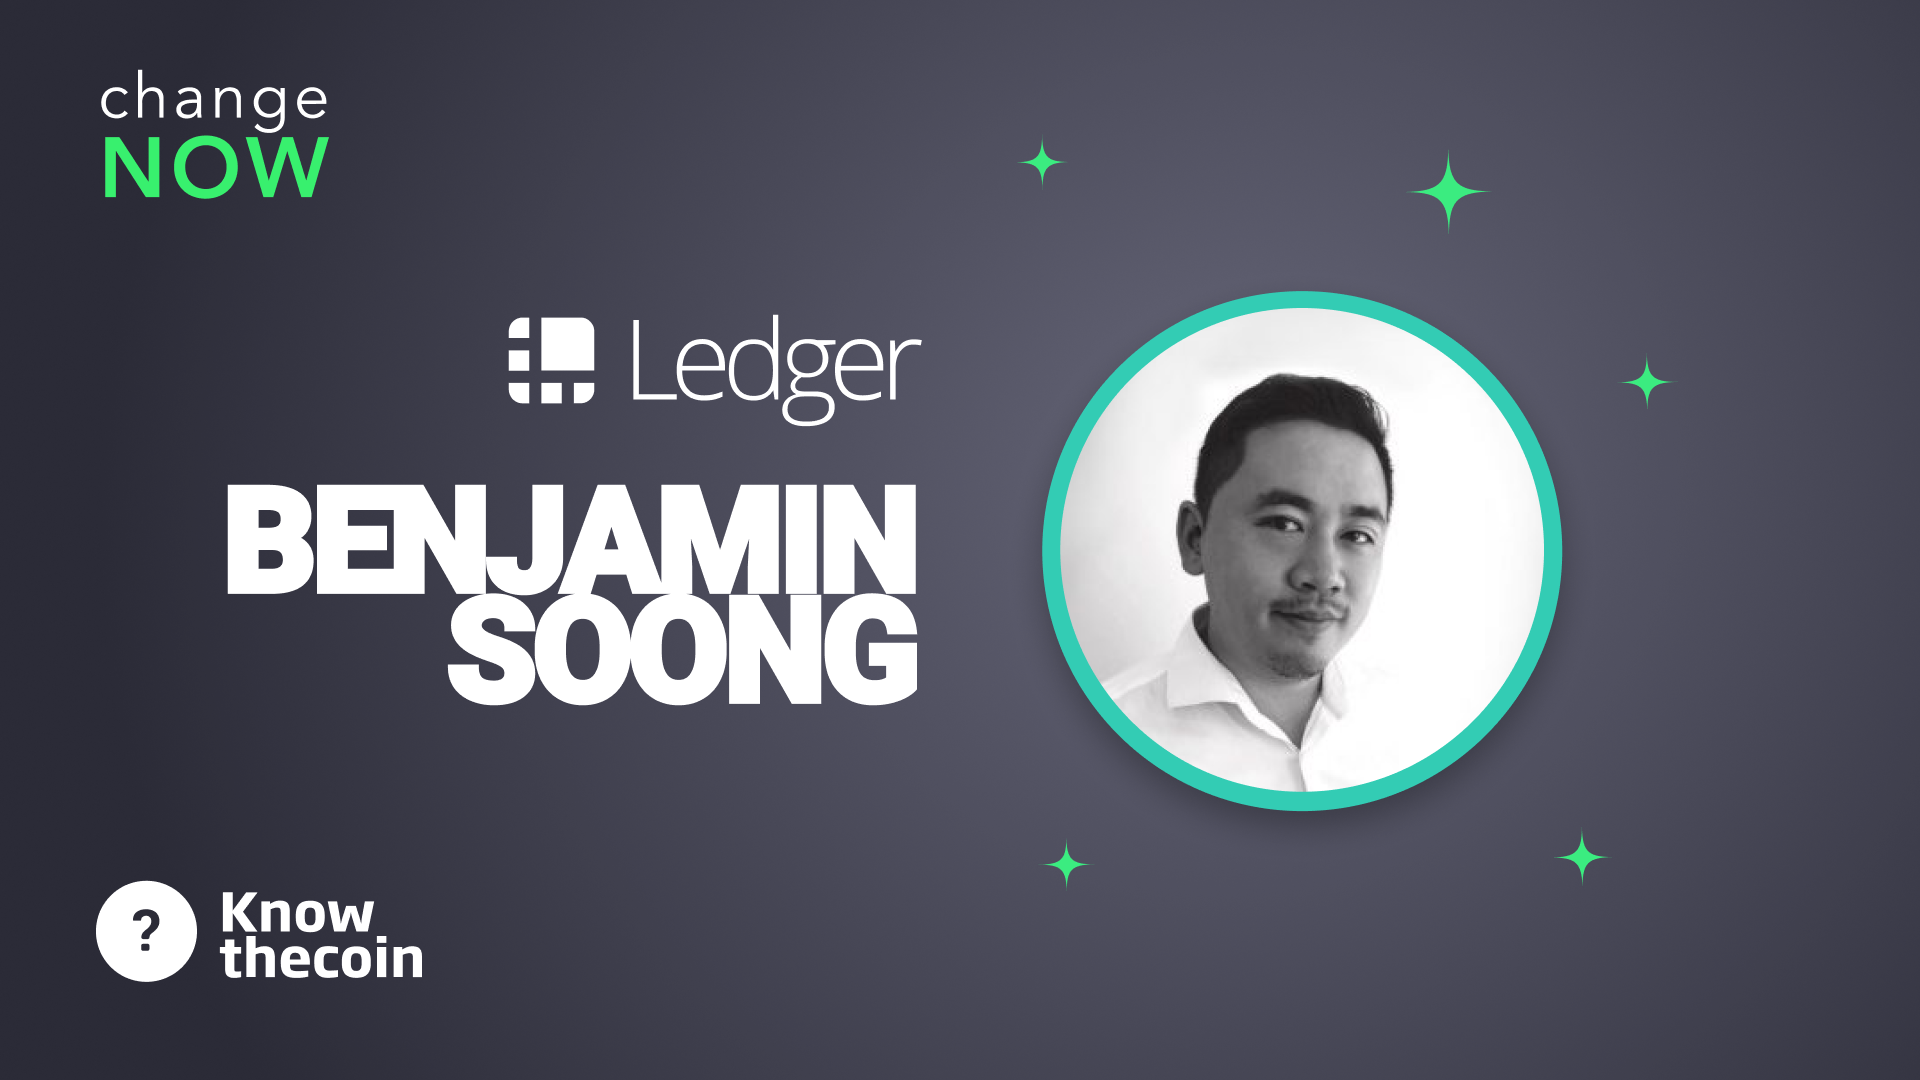 Know The Coin: Ledger's Benjamin Soong